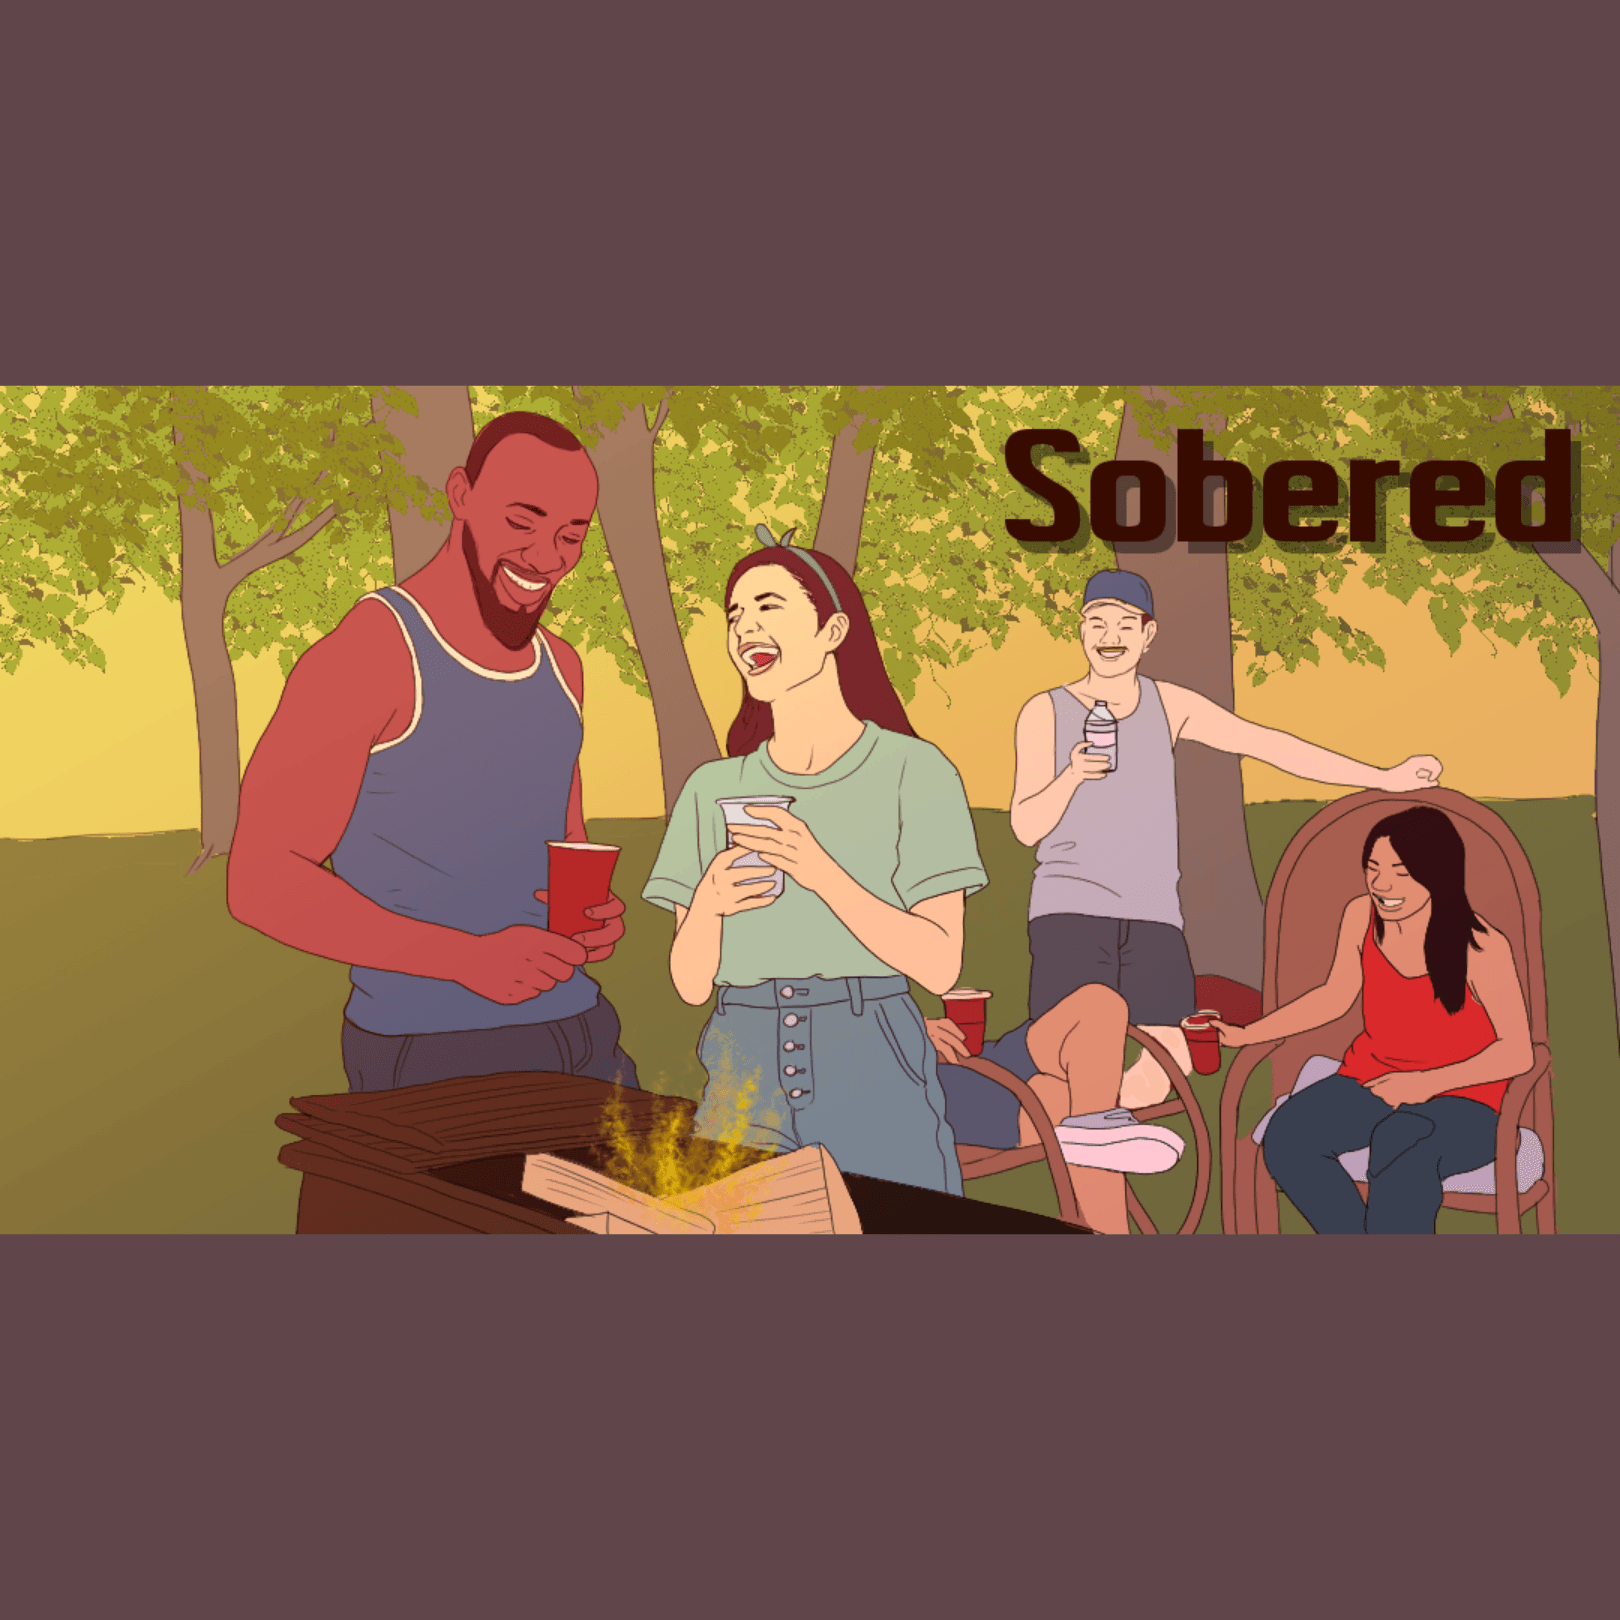 Thumbnail for "Sobered: Reexamining Your Relationship With Alcohol".